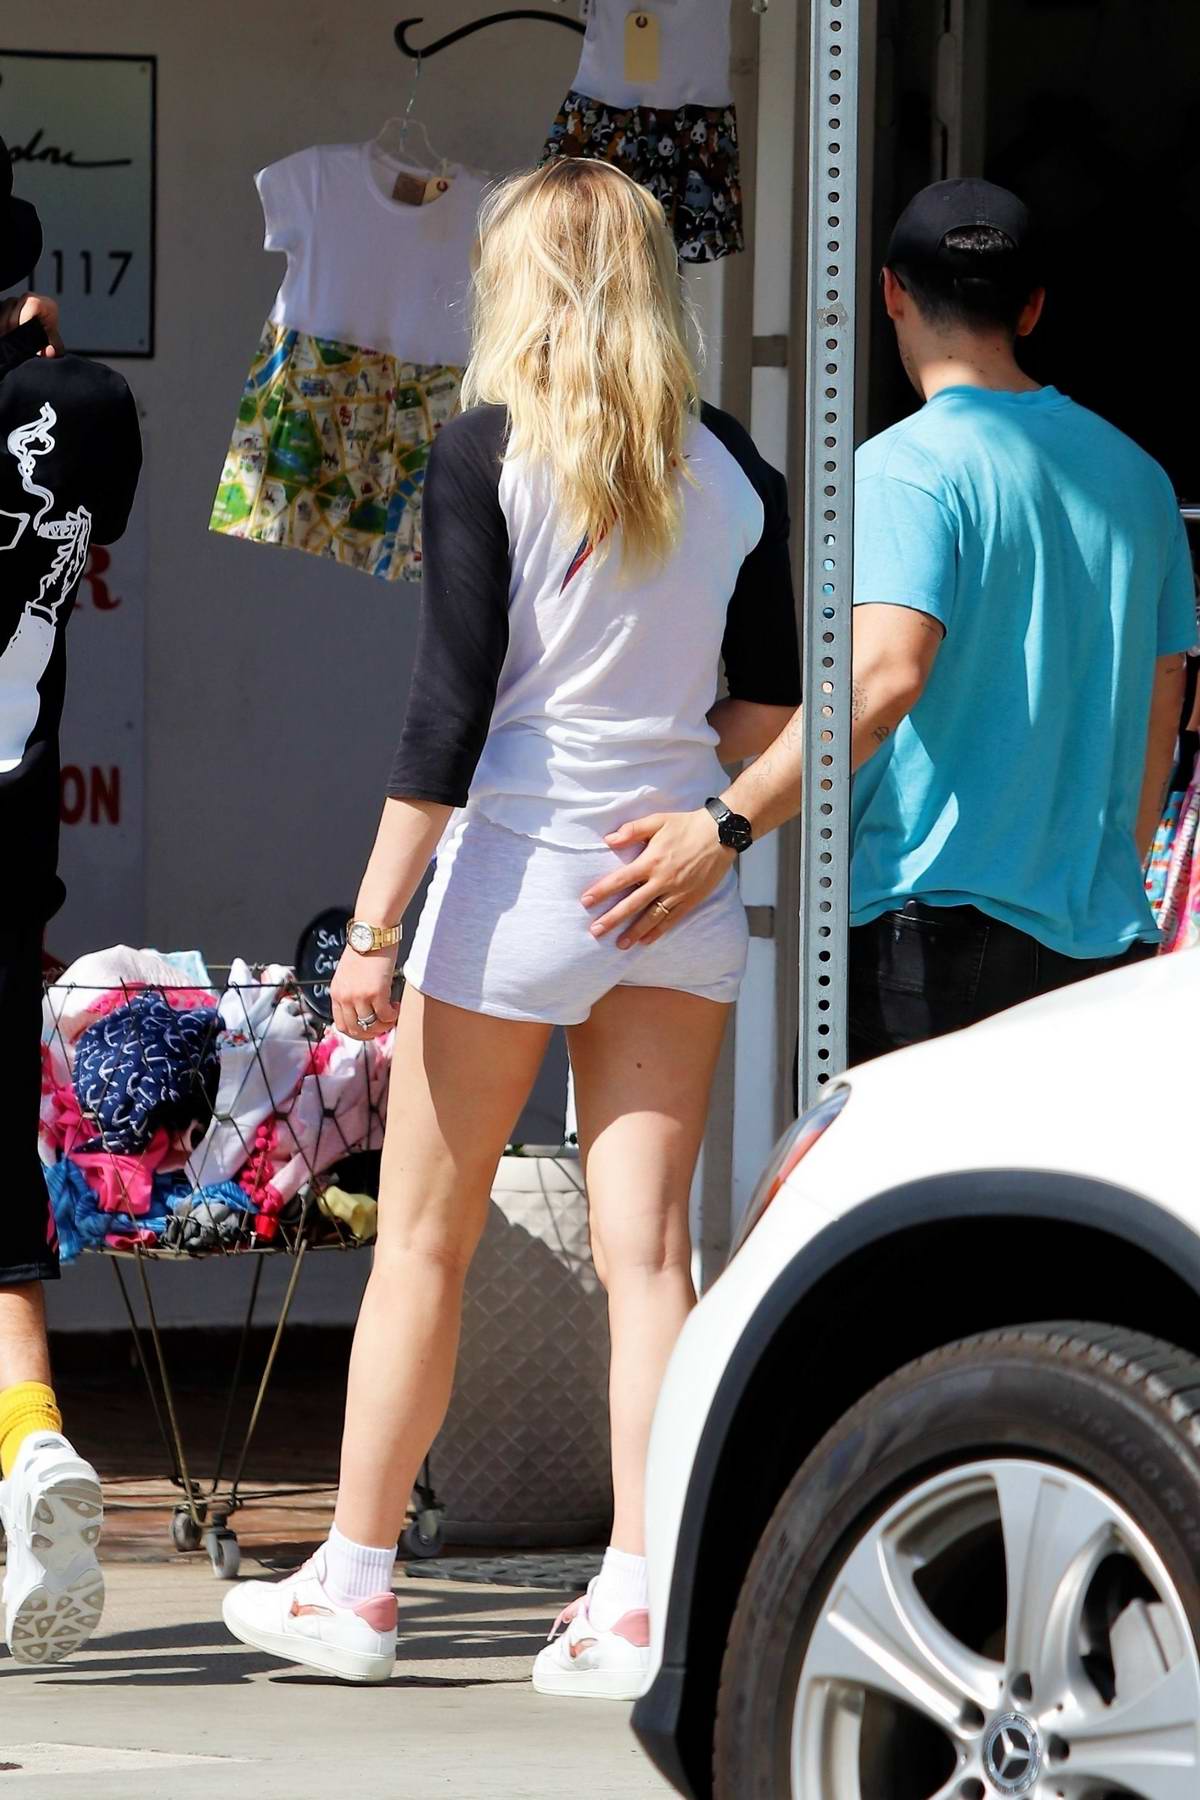 sophie-turner-shows-off-her-long-legs-in-shorts-while-out-for-lunch-with-joe-jonas-in-studio-city-california-060320_10.jpg